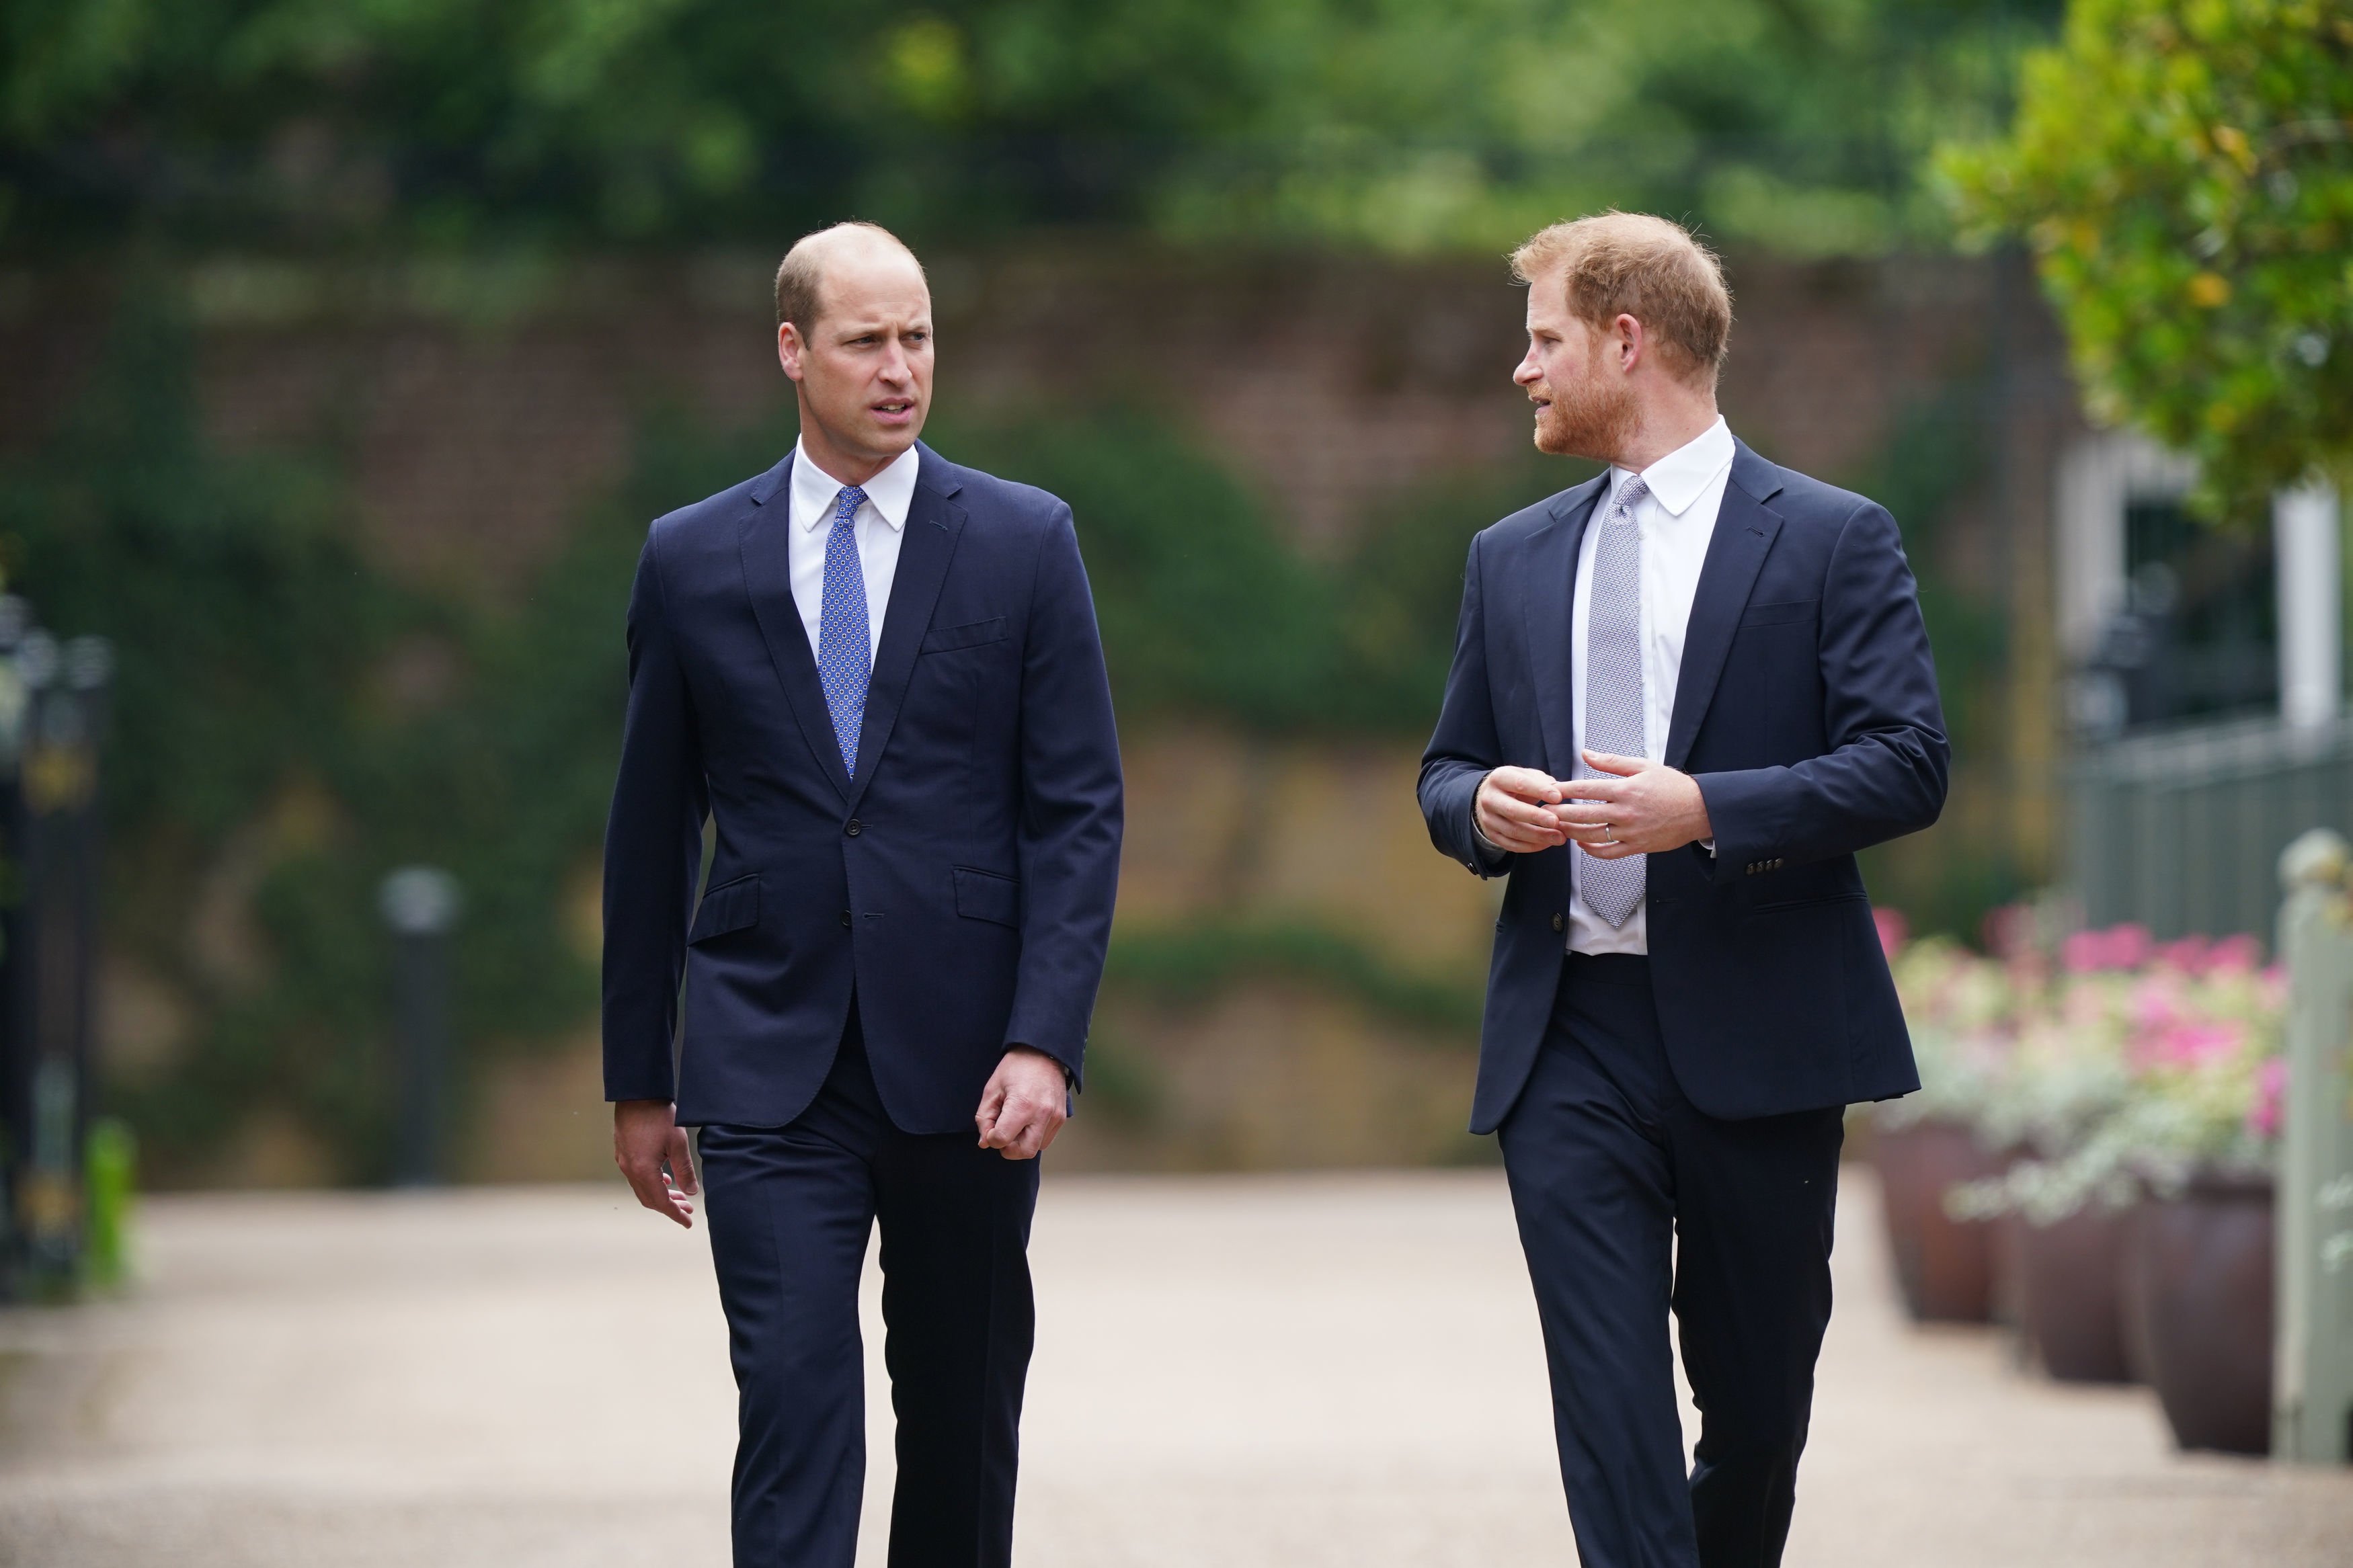 Prince William, Duke of Cambridge and Prince Harry, Duke of Sussex arrive for the unveiling of a statue they commissioned of their mother Diana, Princess of Wales, in the Sunken Garden at Kensington Palace. | Source: Getty Images